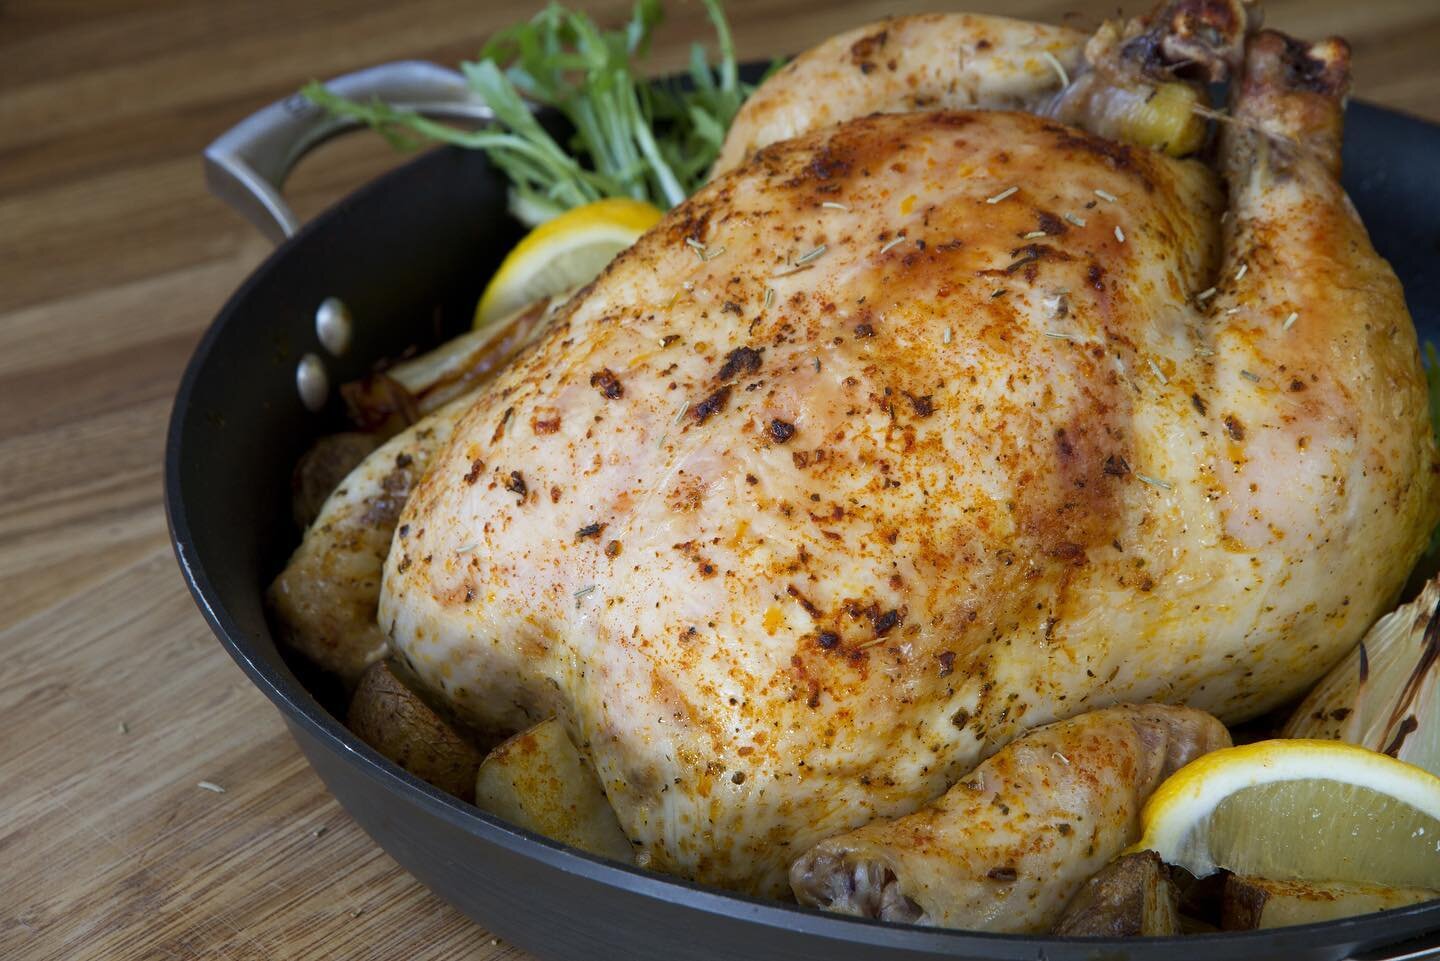 Whole chickens are on sale! Order online and pick up at the farm when it works for you.

https://www.db-farms.com/shop/whole-roasting-chicken

Roasting a whole chicken (or two) is one of our favorite ways to prep for a week&rsquo;s meals. We love hav